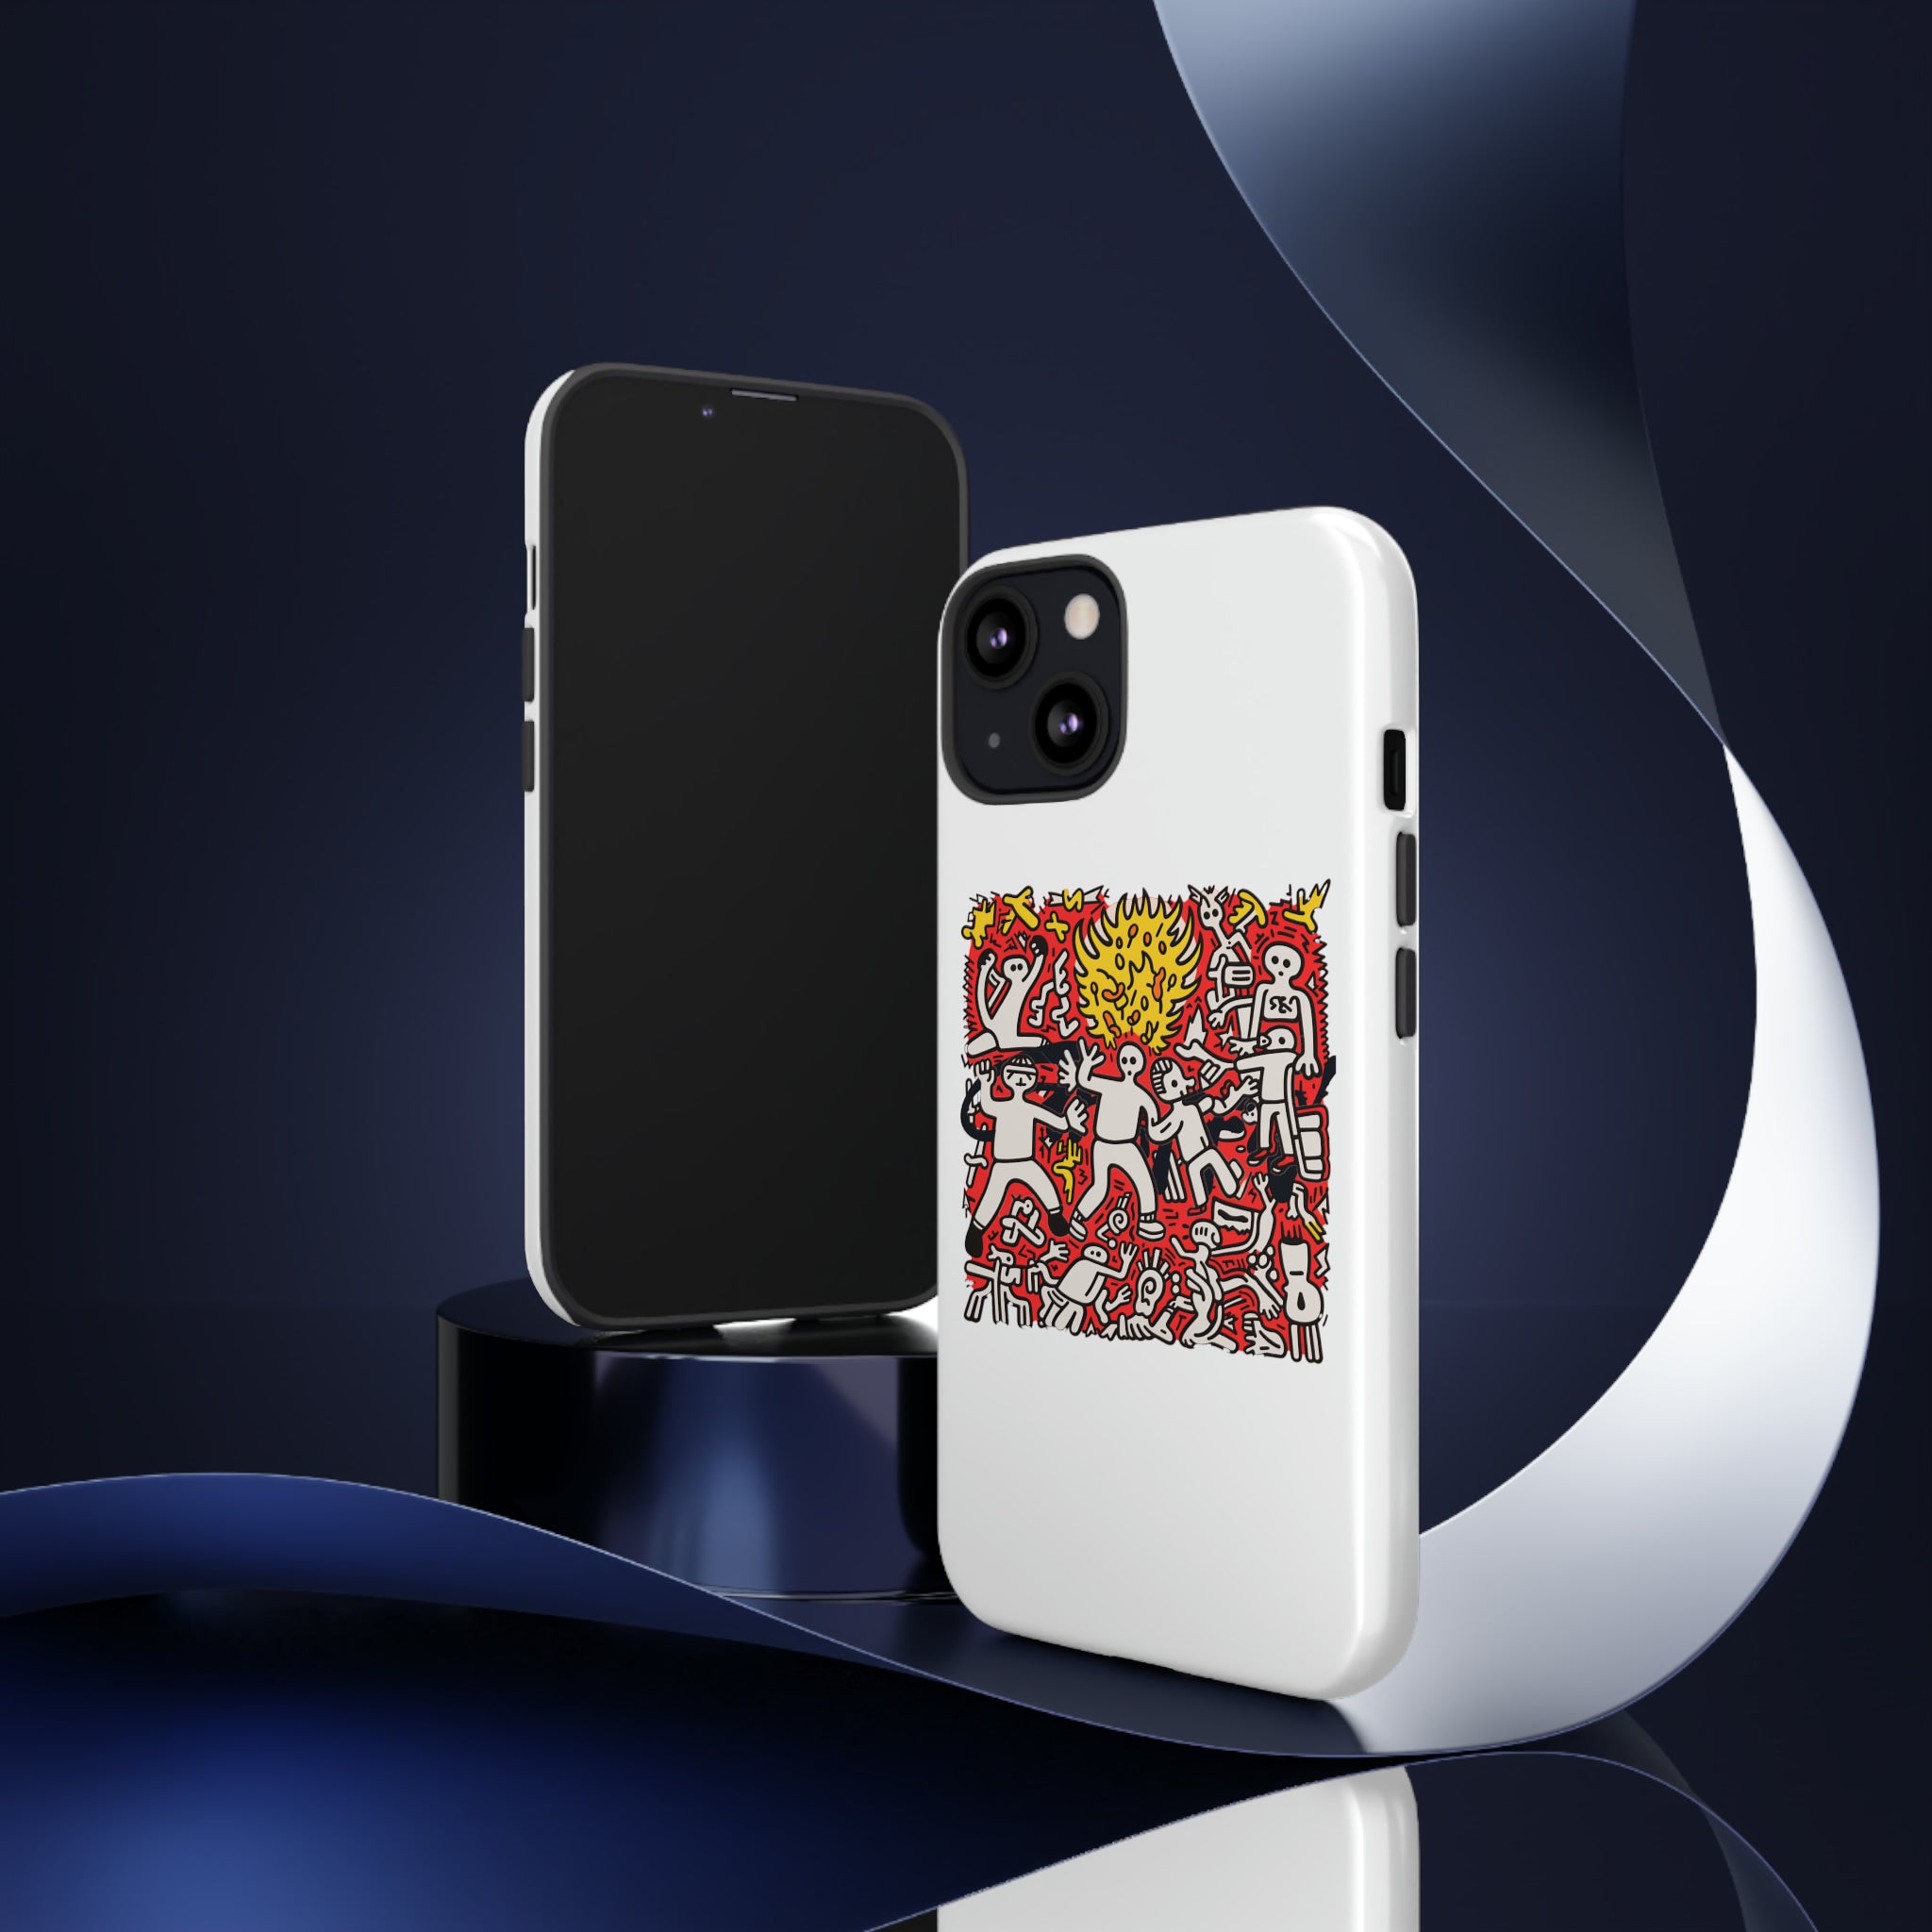 Urban Pulse: The vision of Peaceful Rebellion | iPhone Case